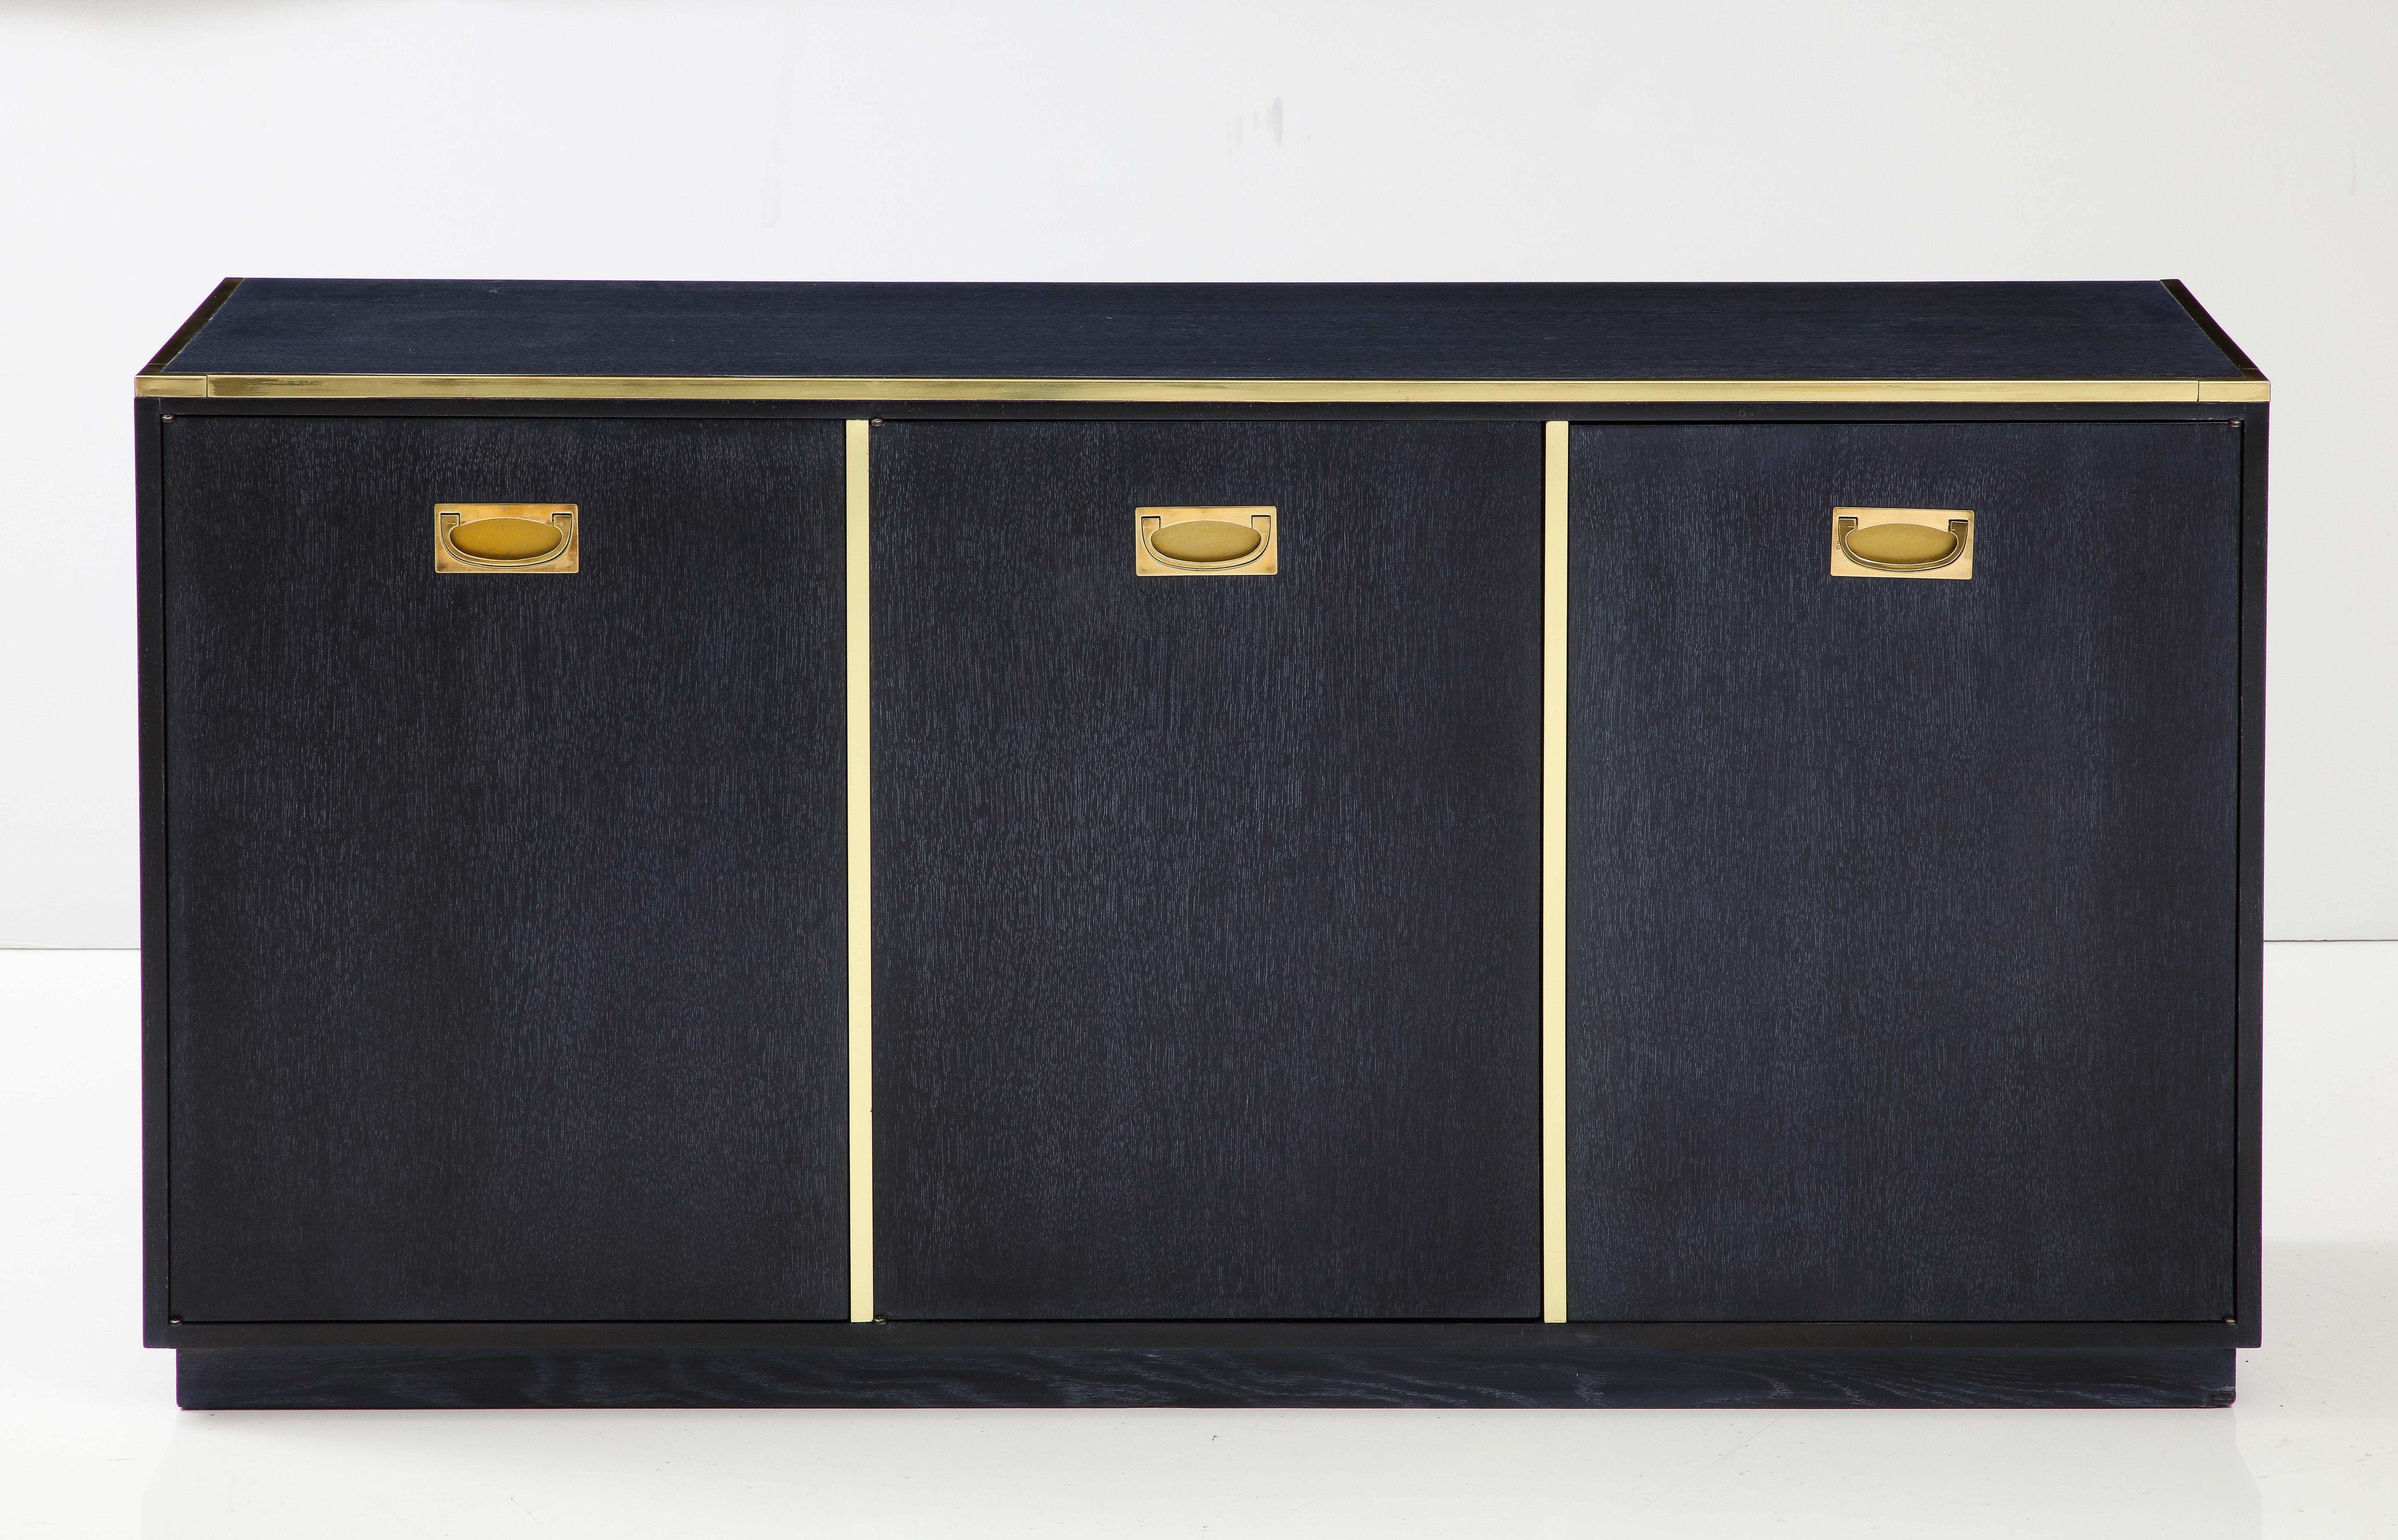 1960s Mid-Century Modern brass and oak small credenza designed by Michael Taylor for Baker. Newly restored in dark blue cerused finish.